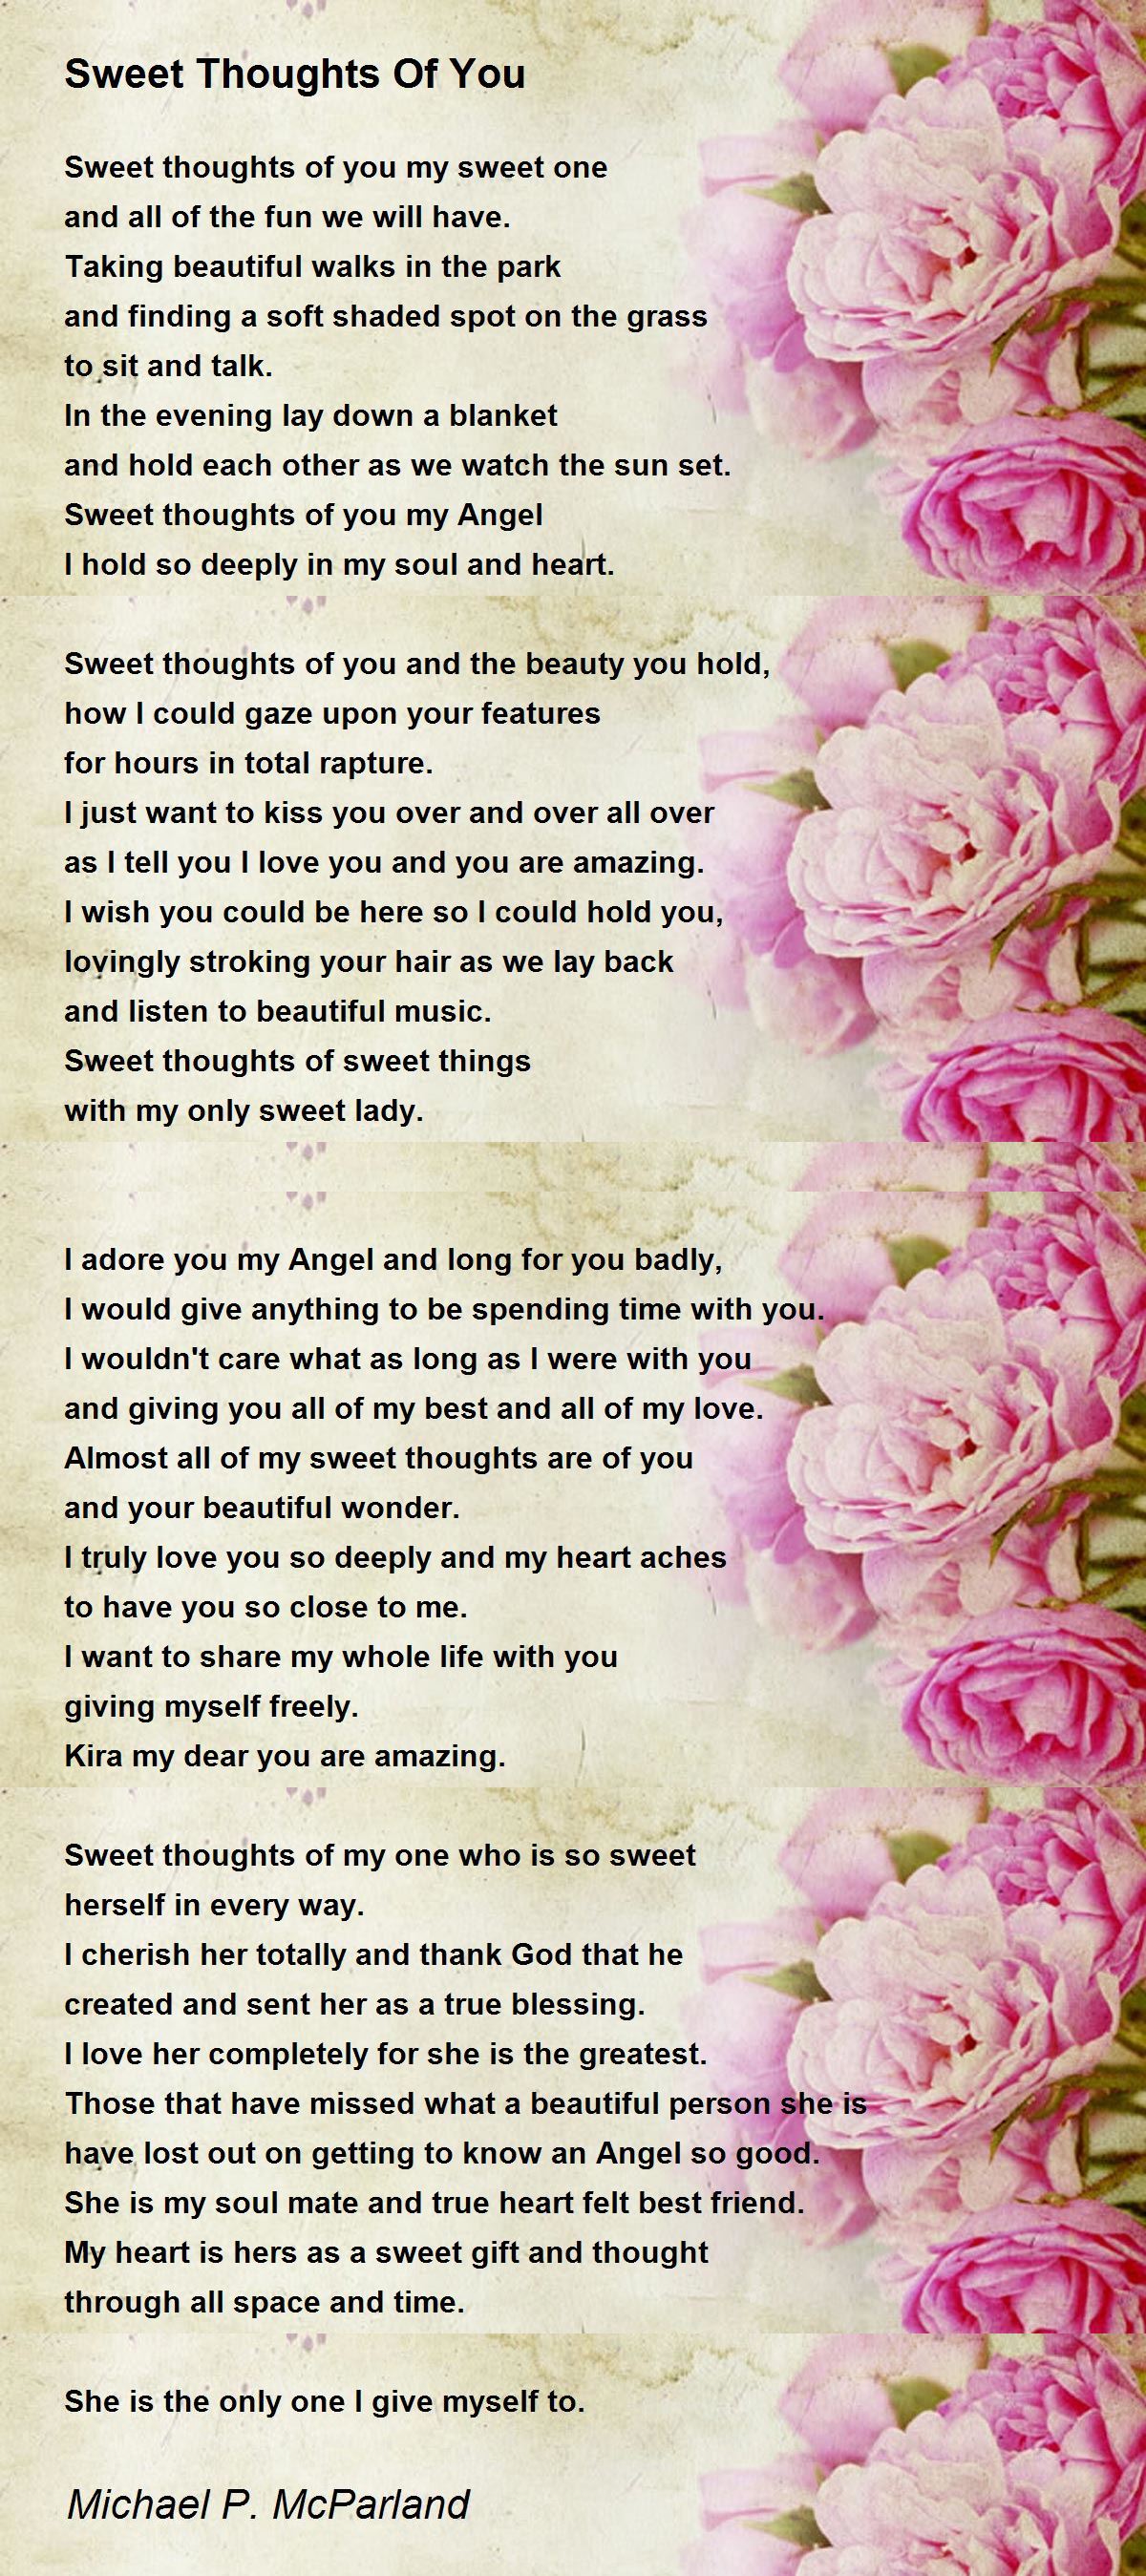 Sweet Thoughts Of You - Sweet Thoughts Of You Poem by Michael P. McParland